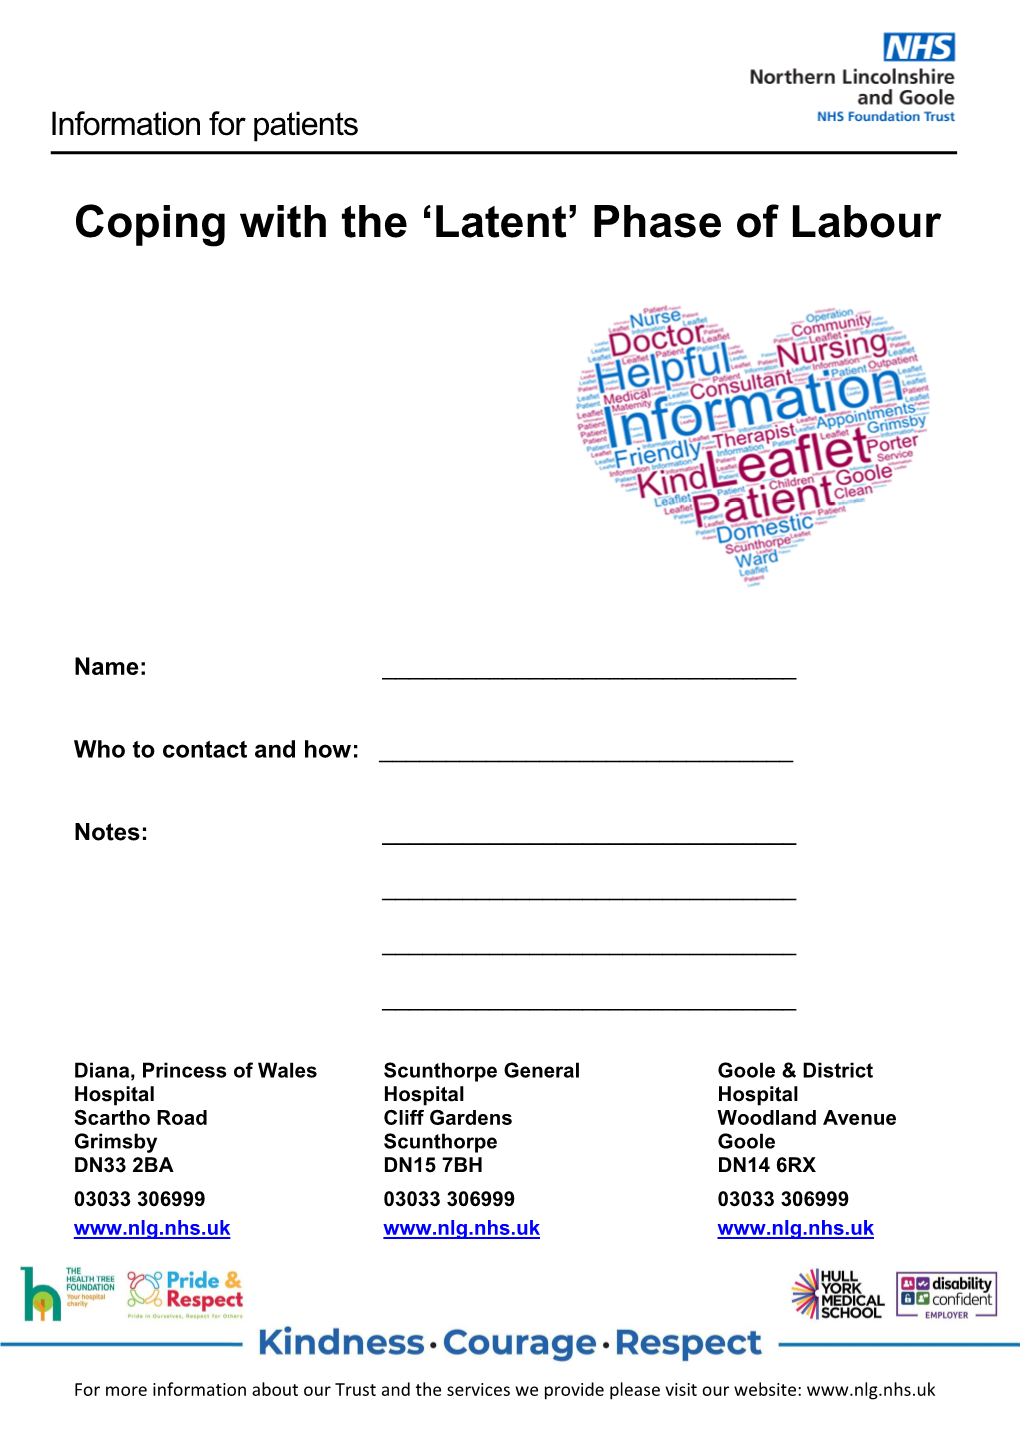 Coping with the 'Latent' Phase of Labour